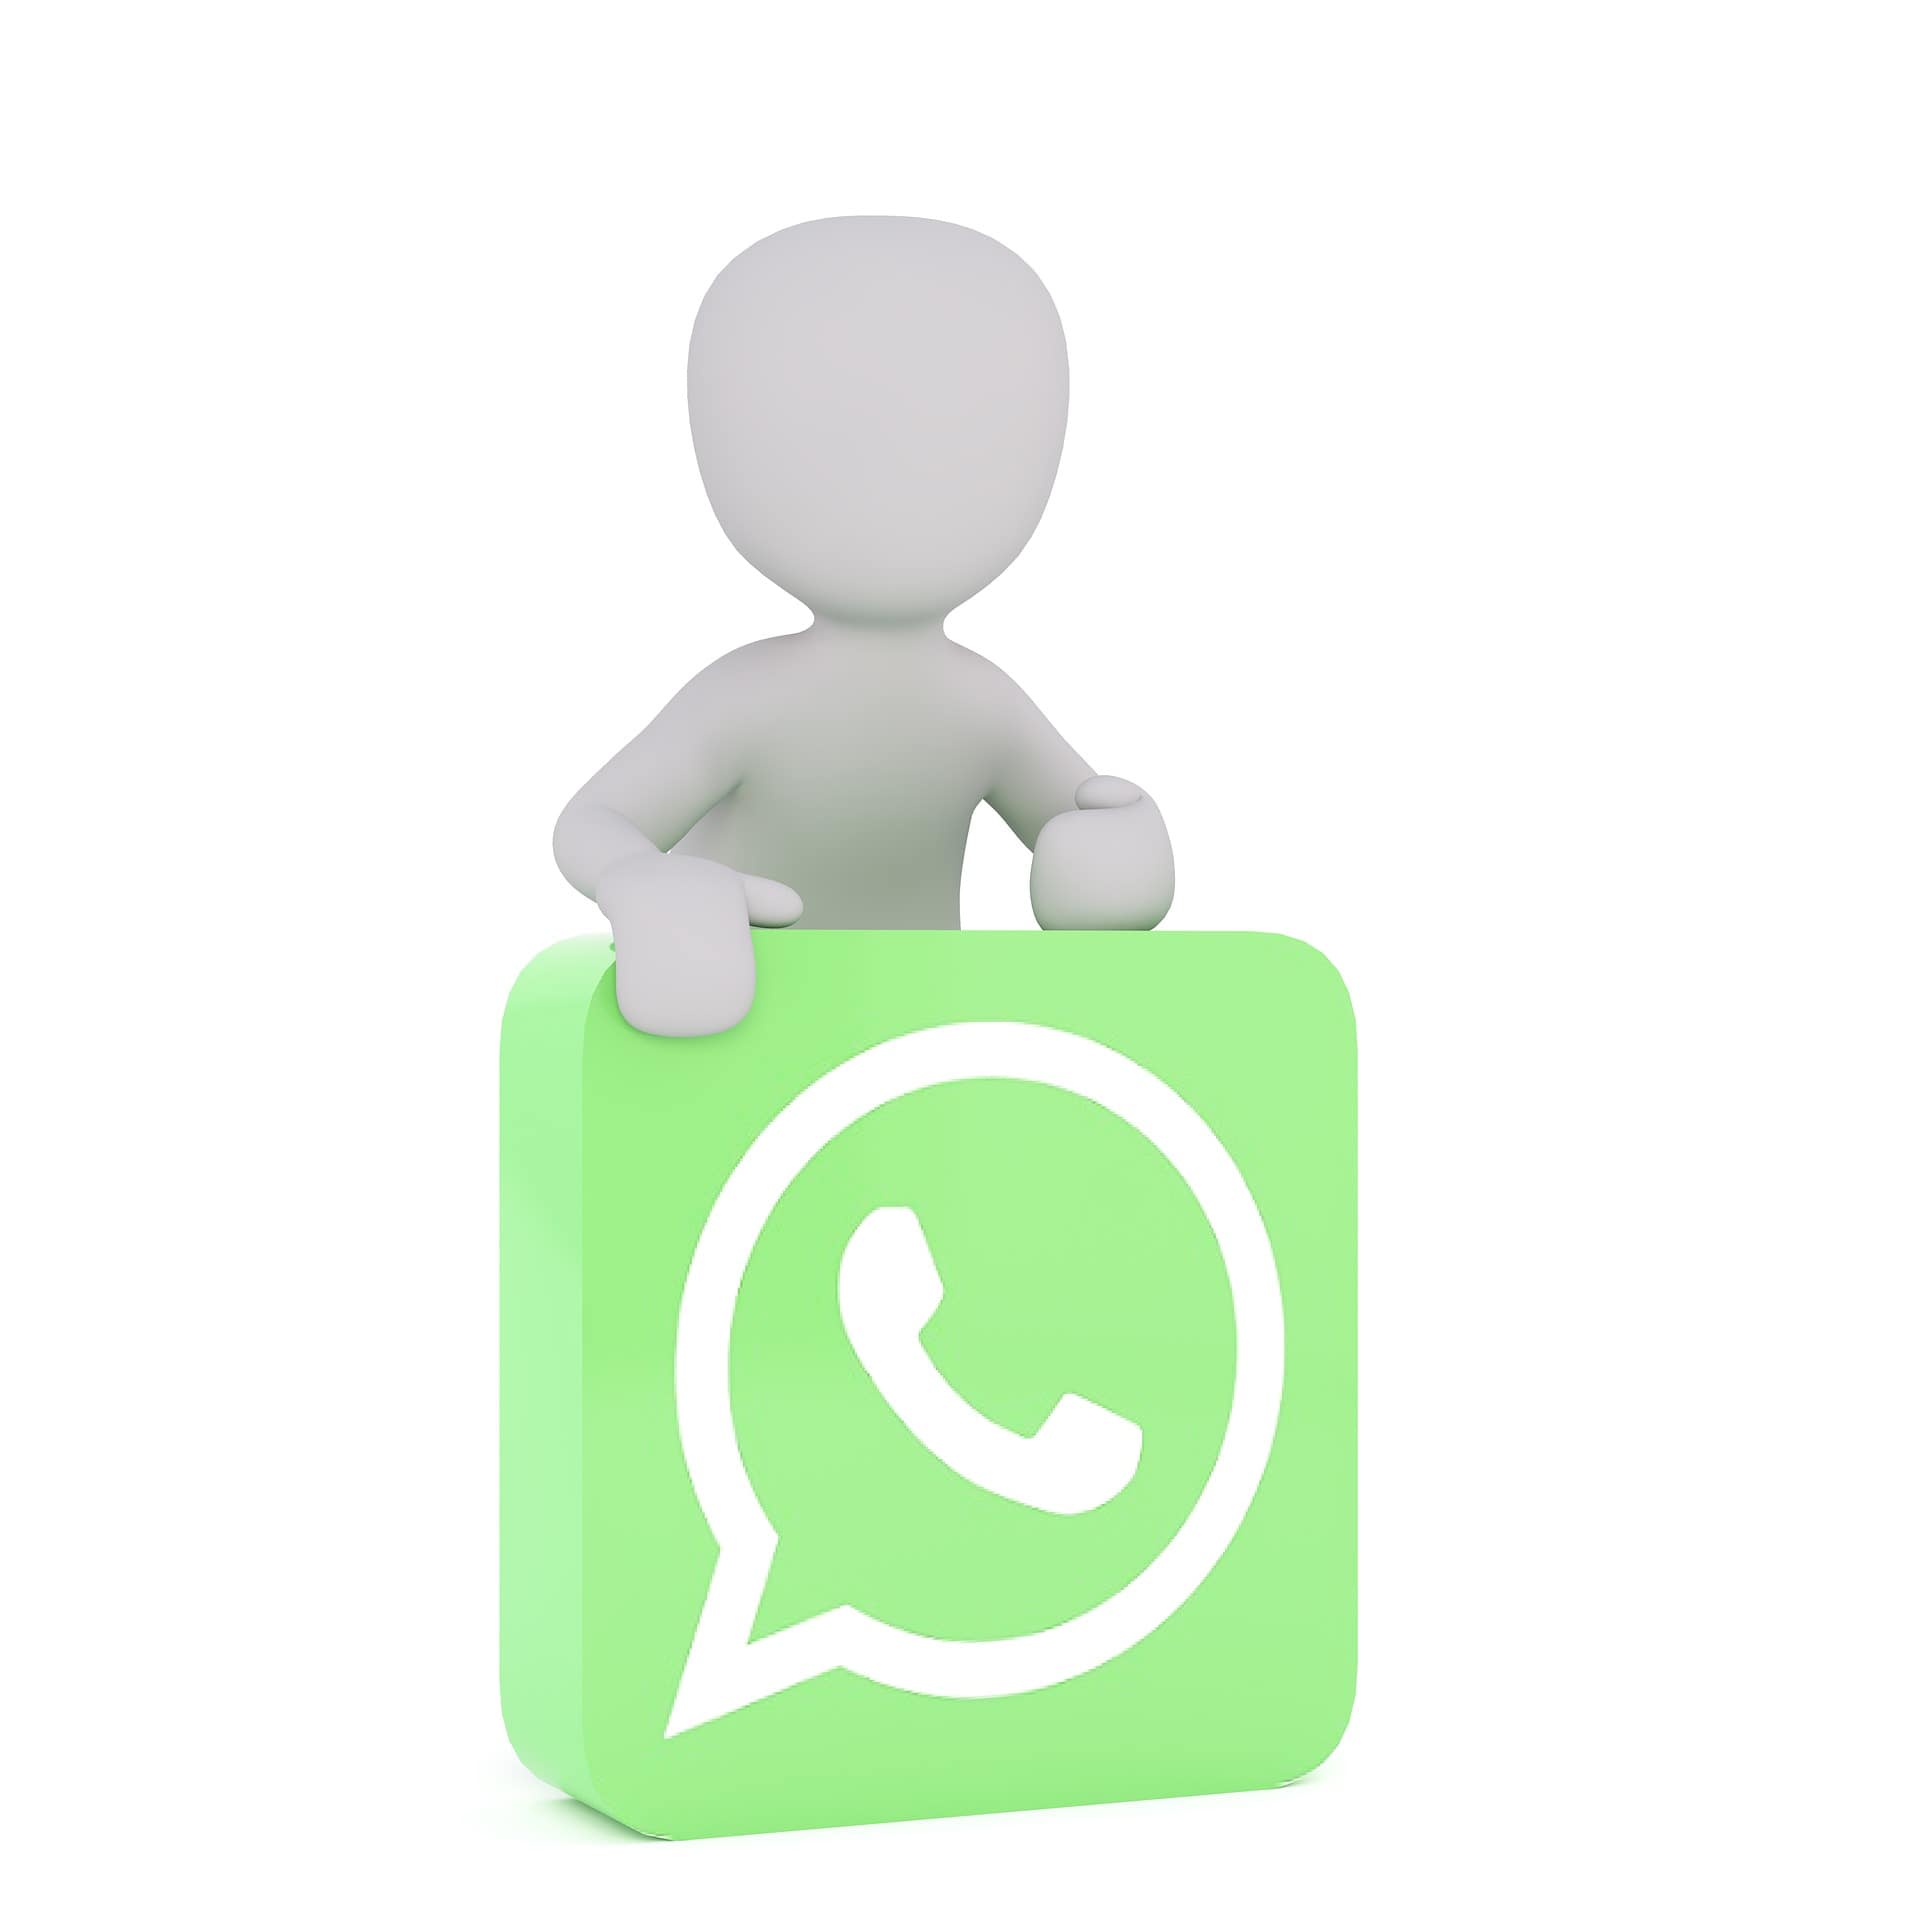 Top Tips for Marketing with WhatsApp 